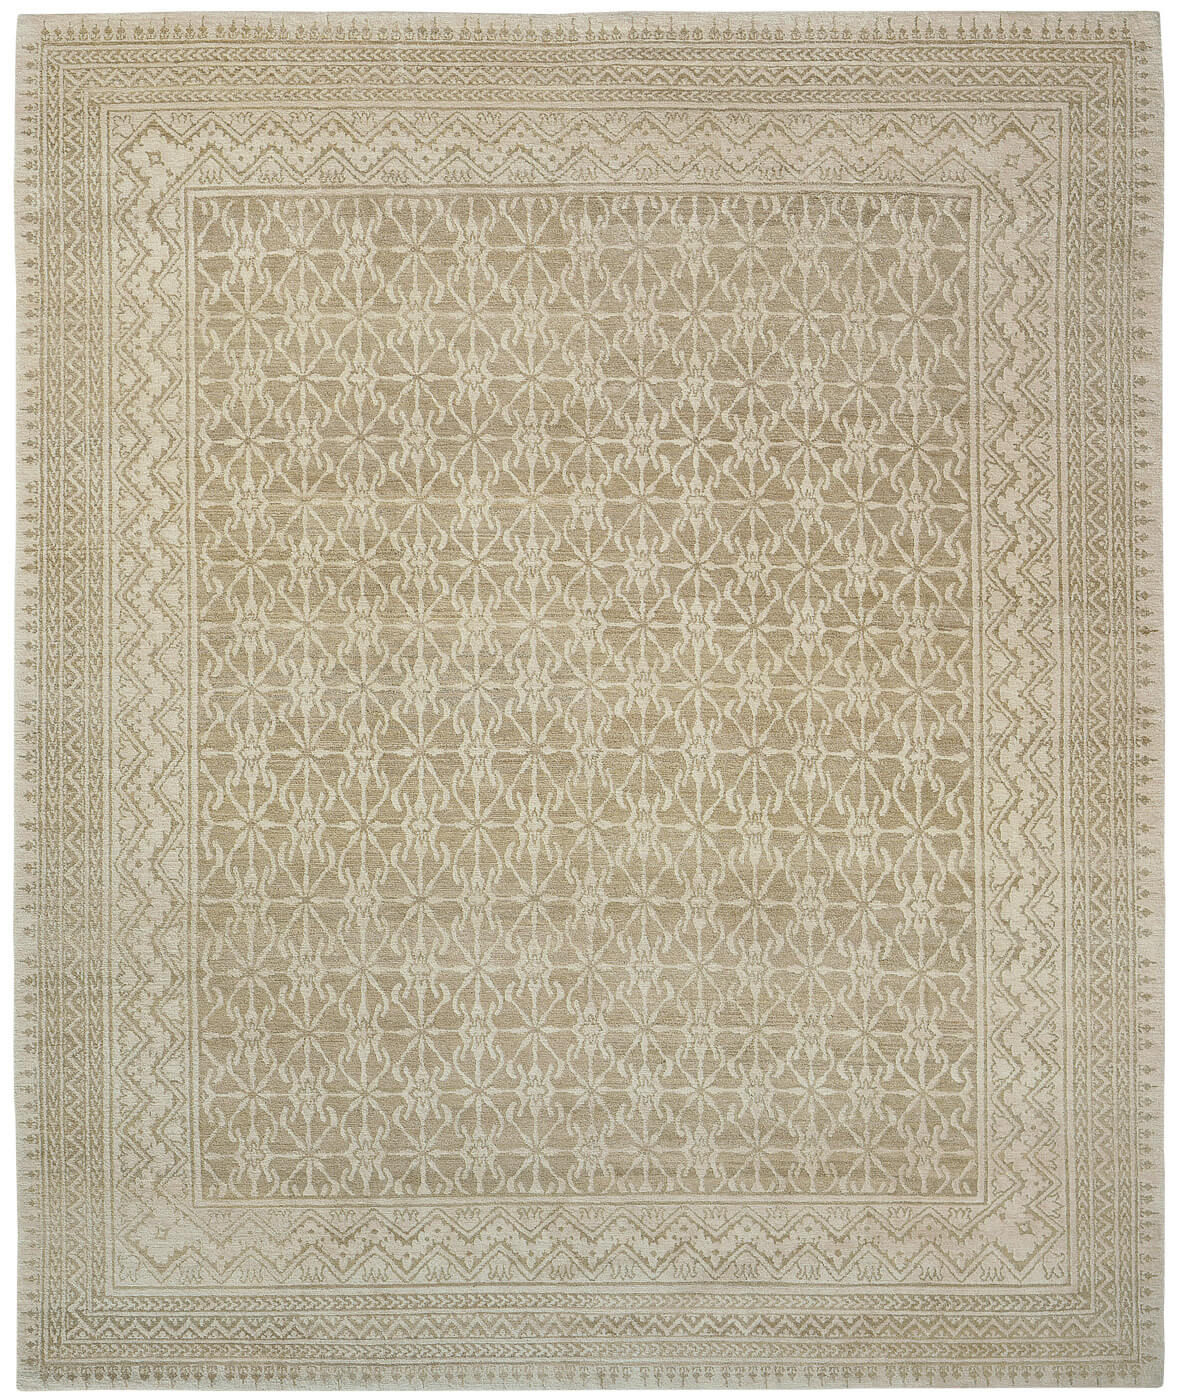 Blueberry Luxury Hand-woven Rug ☞ Size: 300 x 400 cm